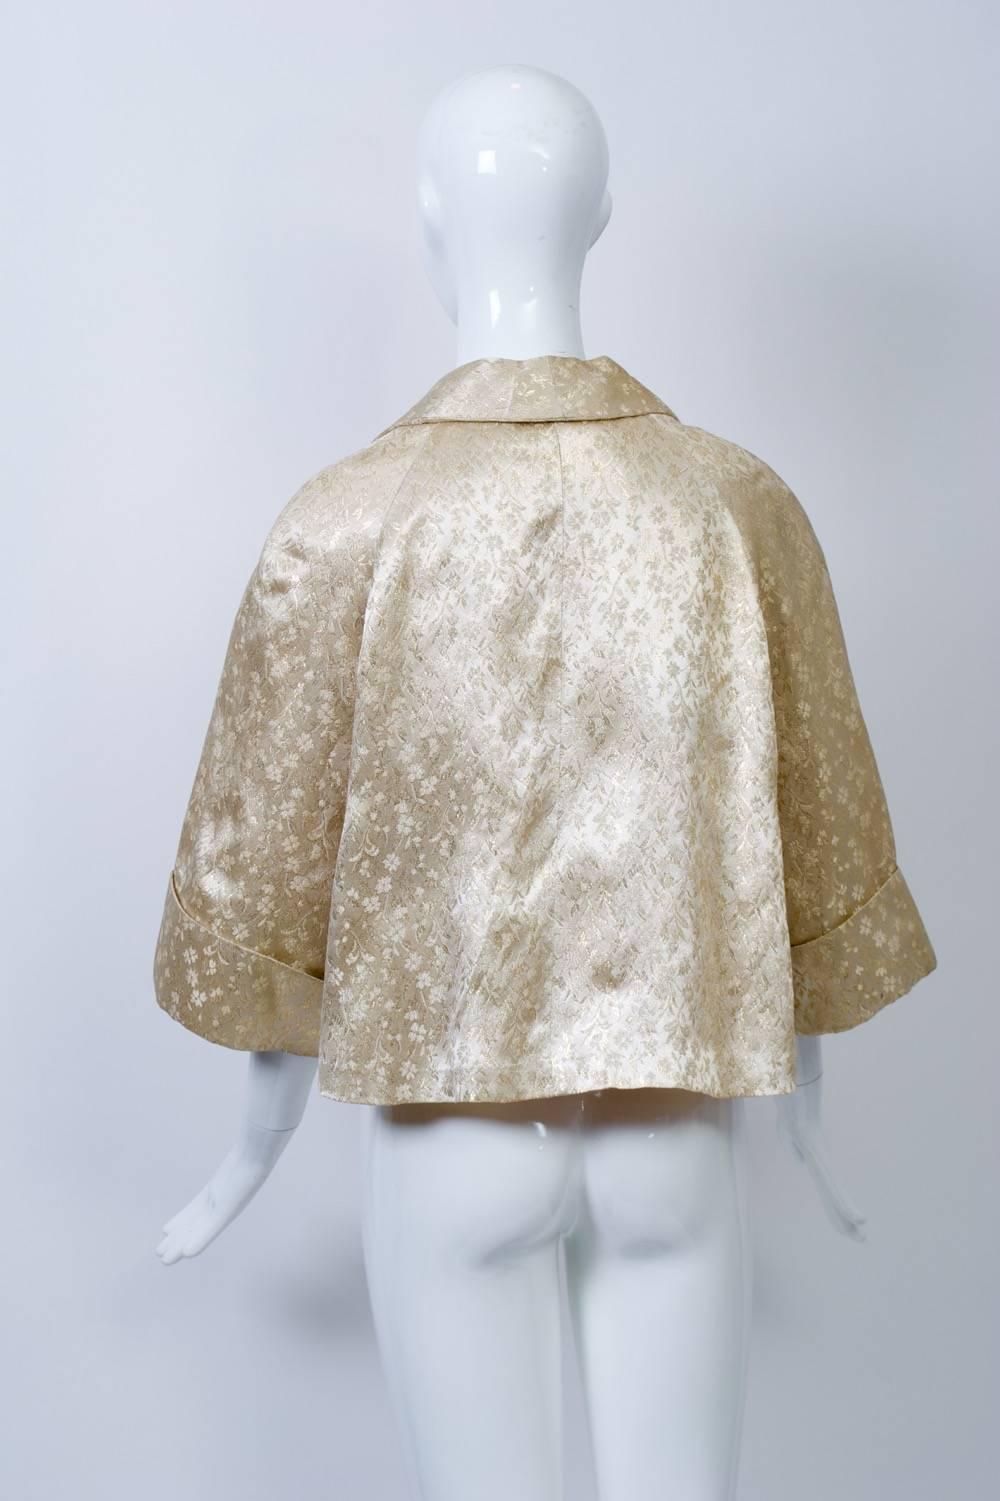 Vintage short swing jacket in ivory and gold brocade features wide, graduated lapels and wide three-quarter cuffed sleeves. Lined in beige taffeta. Retailed by B. Altman & Co. One size.